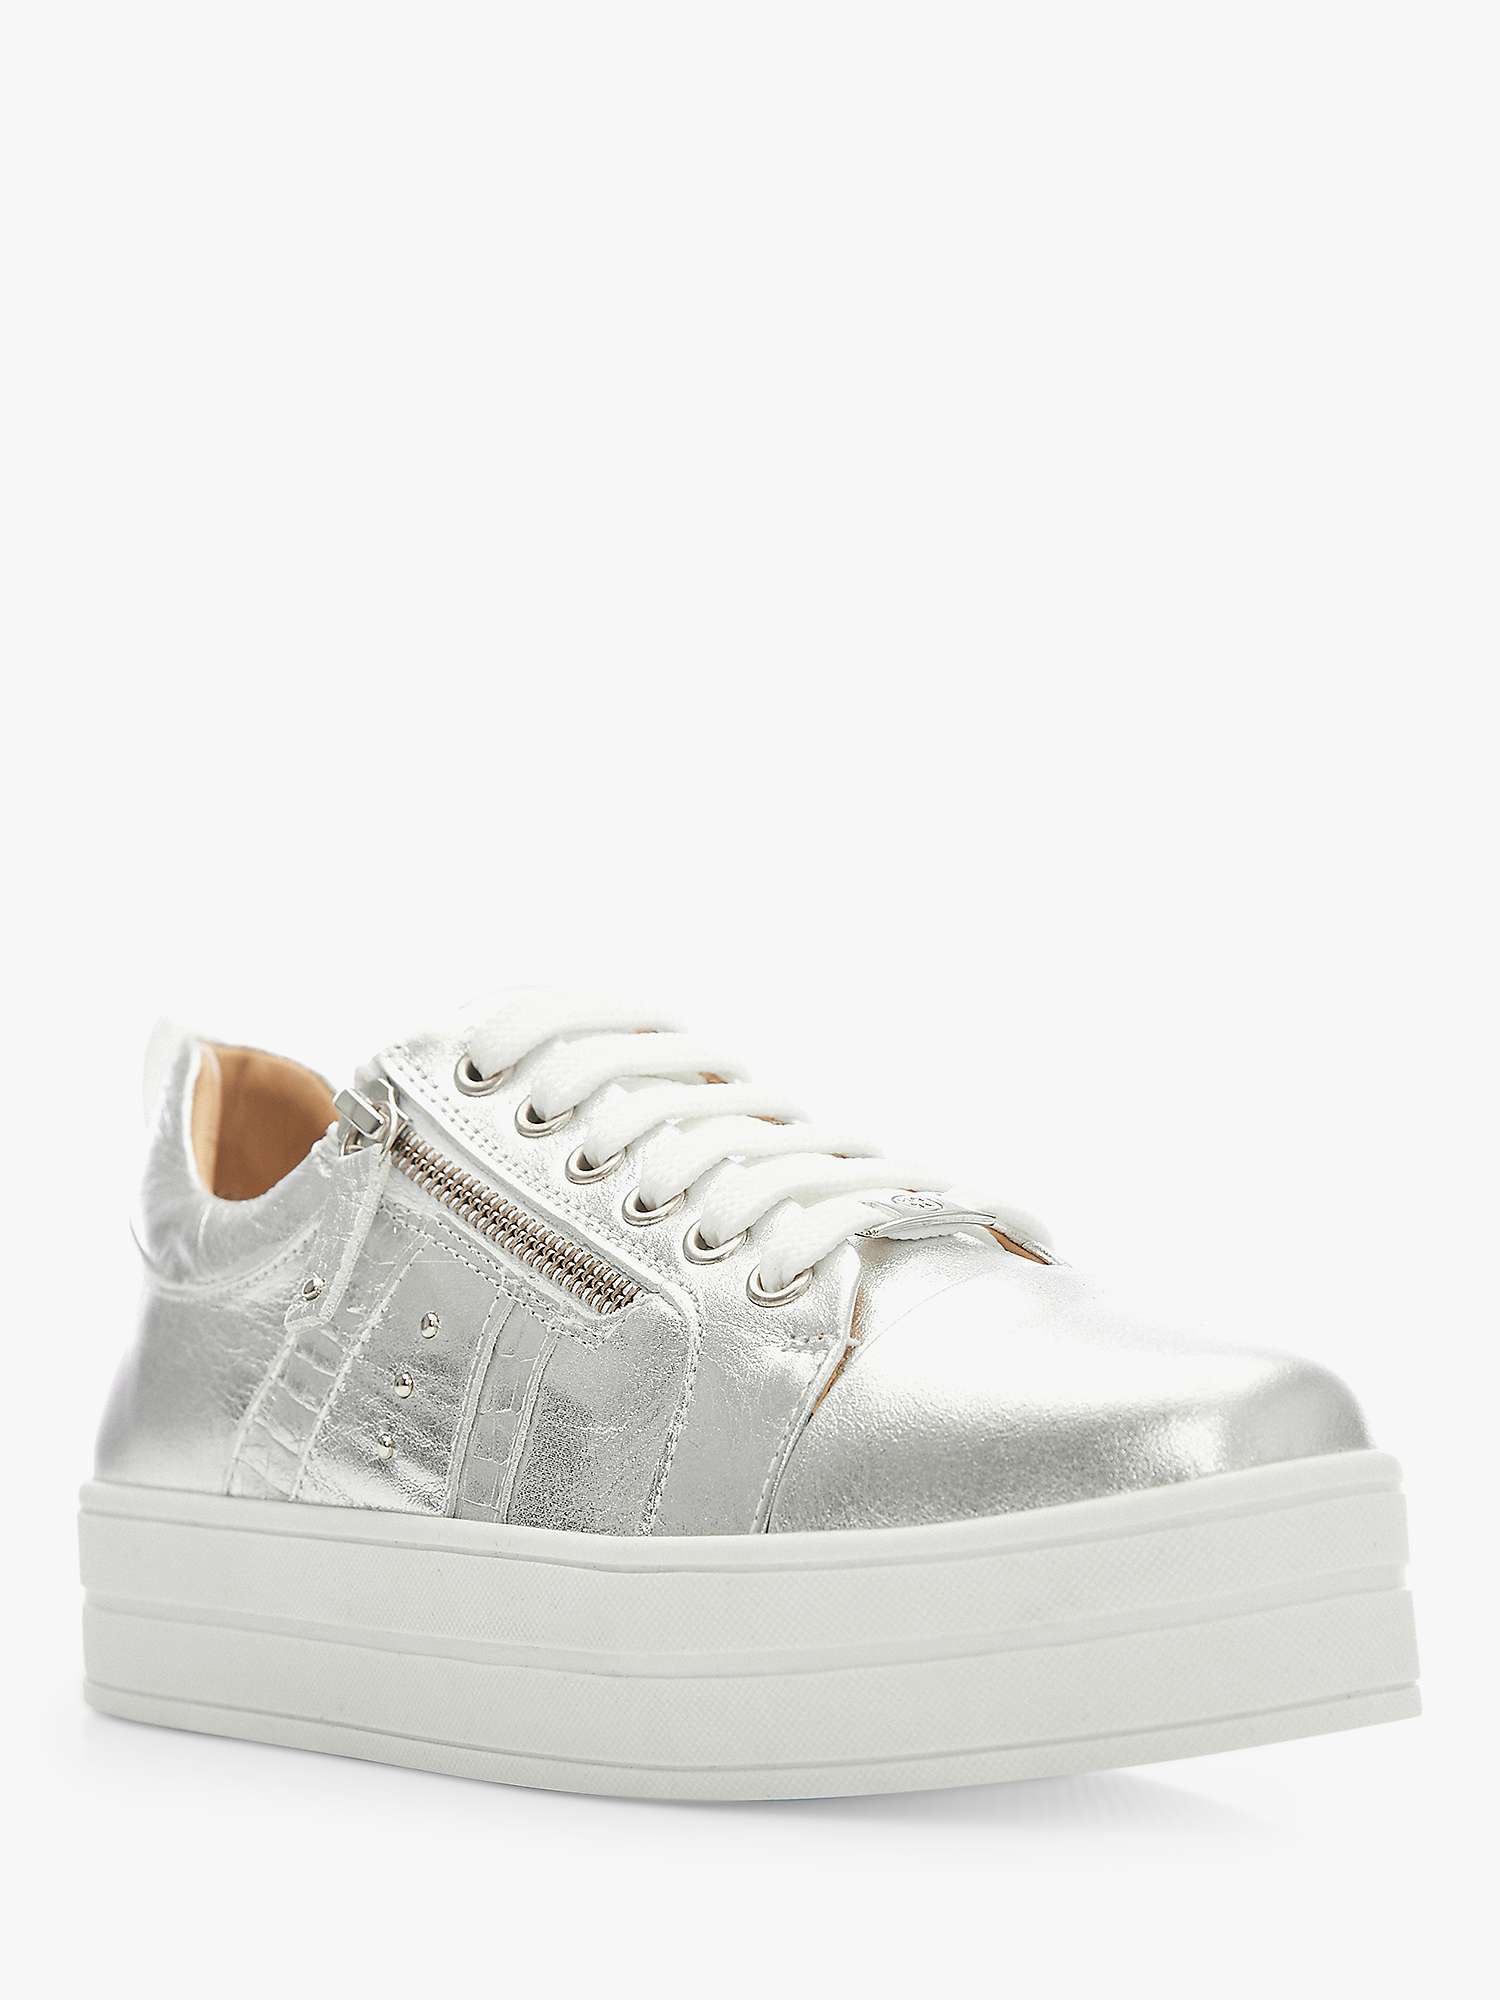 Moda in Pelle Arella Flatform Leather Trainers, Silver at John Lewis ...